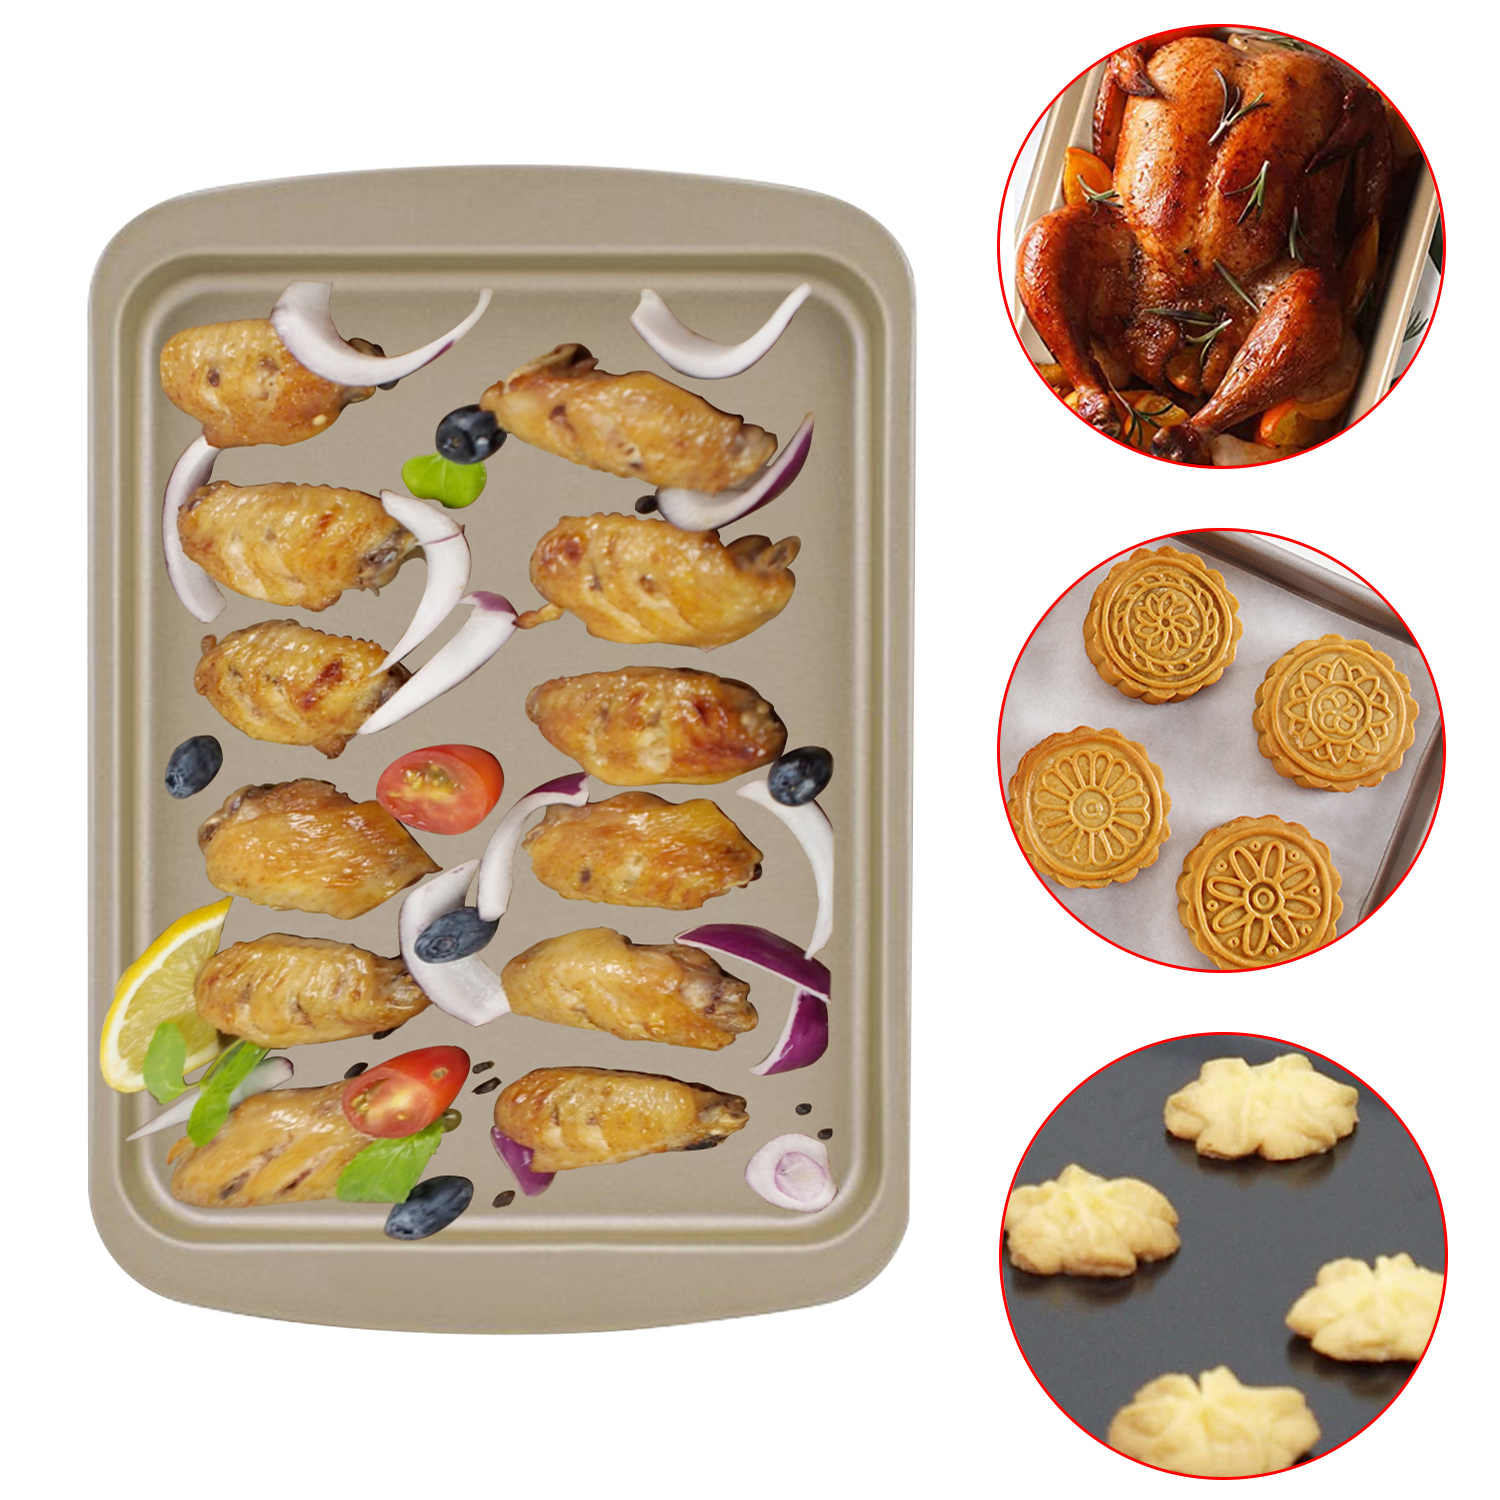 Non-Stick Baking Pan Carbon Steel Baking Sheet Oven Tray for Biscuit Pie Pizza Roast Muffin Bread Bakeware